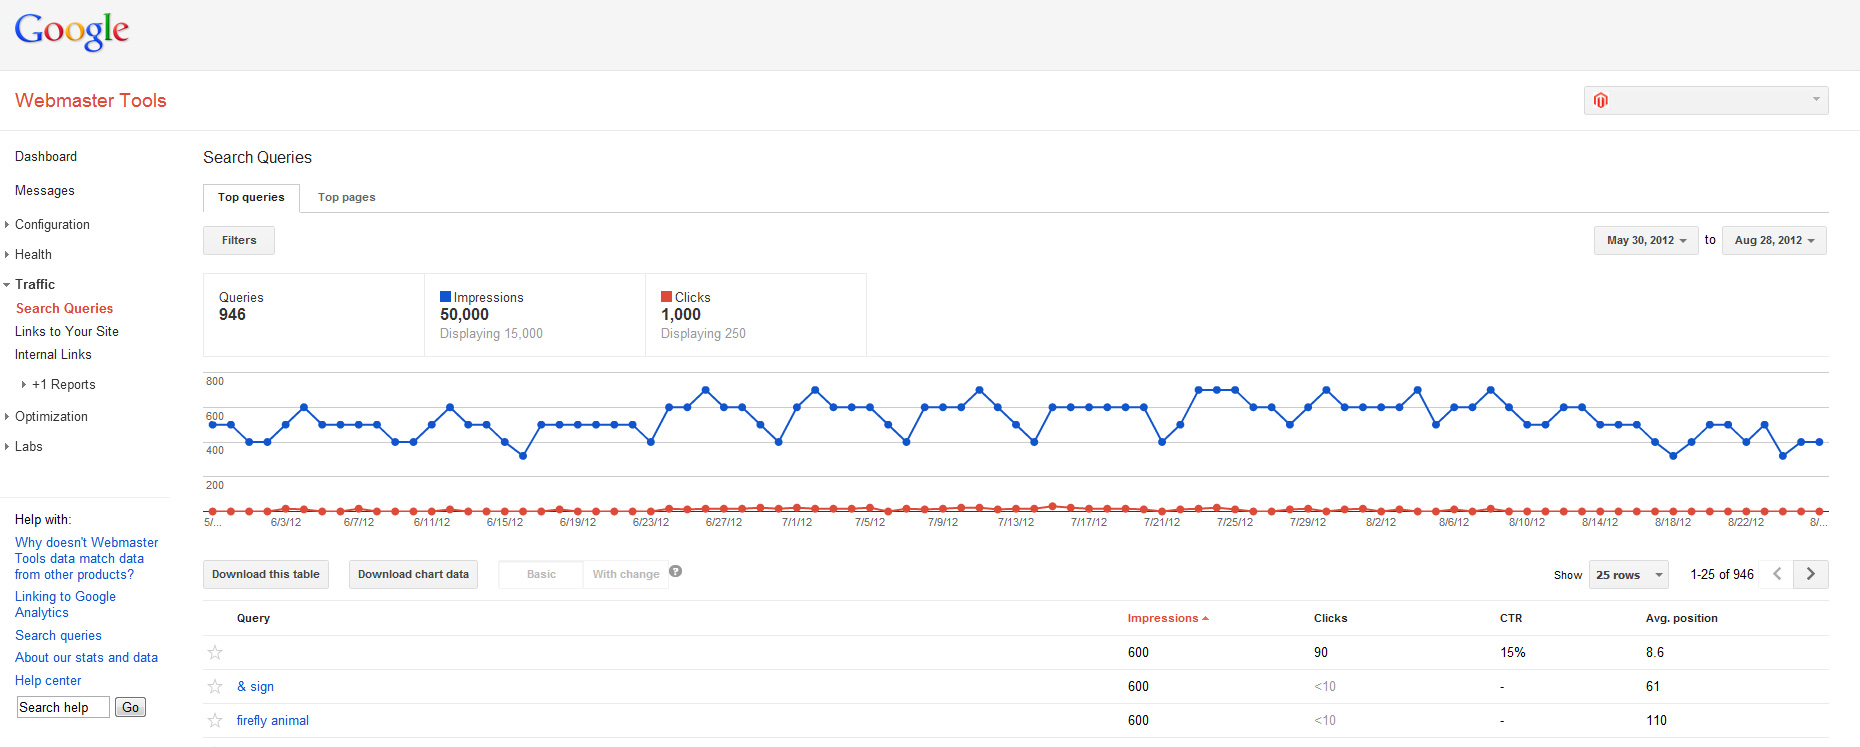 How to Benefit from the New Google Webmaster Tools